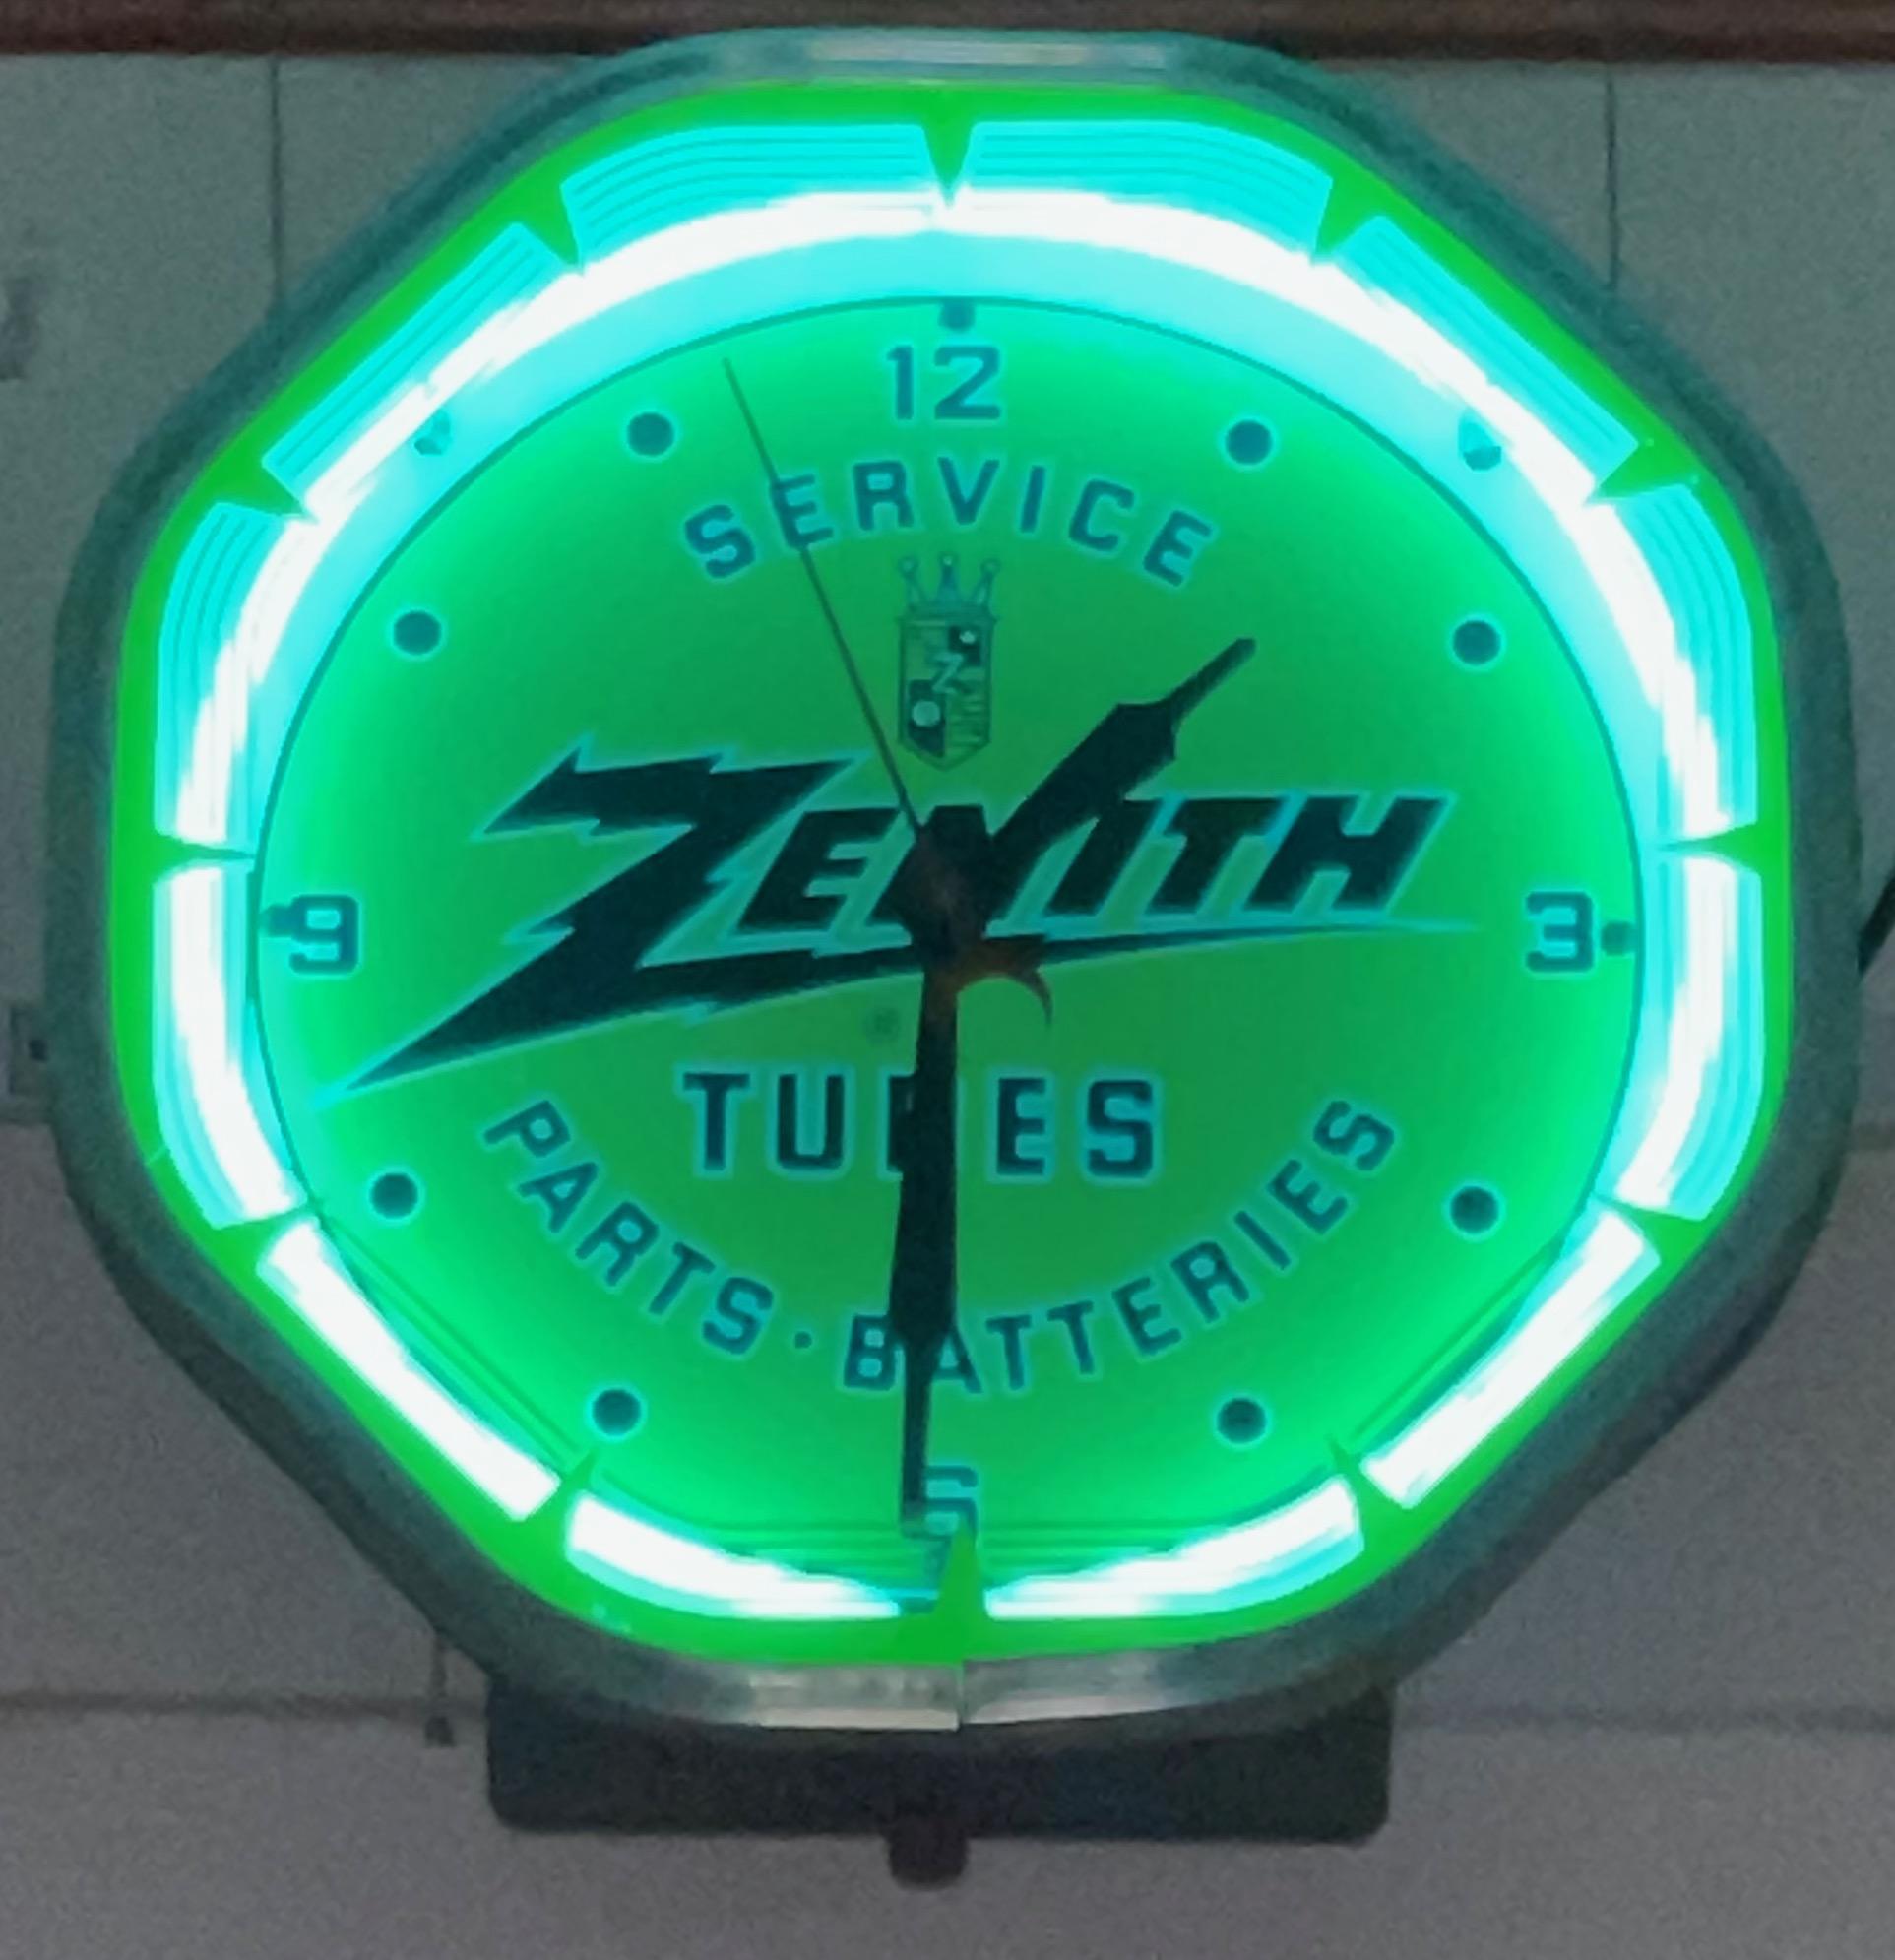 Art Deco Neon Hexagon Vintage with Zenith Advertising wall Clock. This Art Deco vintage hexagon neon color wall clock is impressive and increasingly rare to find in this condition, from the 1930s. The metal housing is green crackle paint which